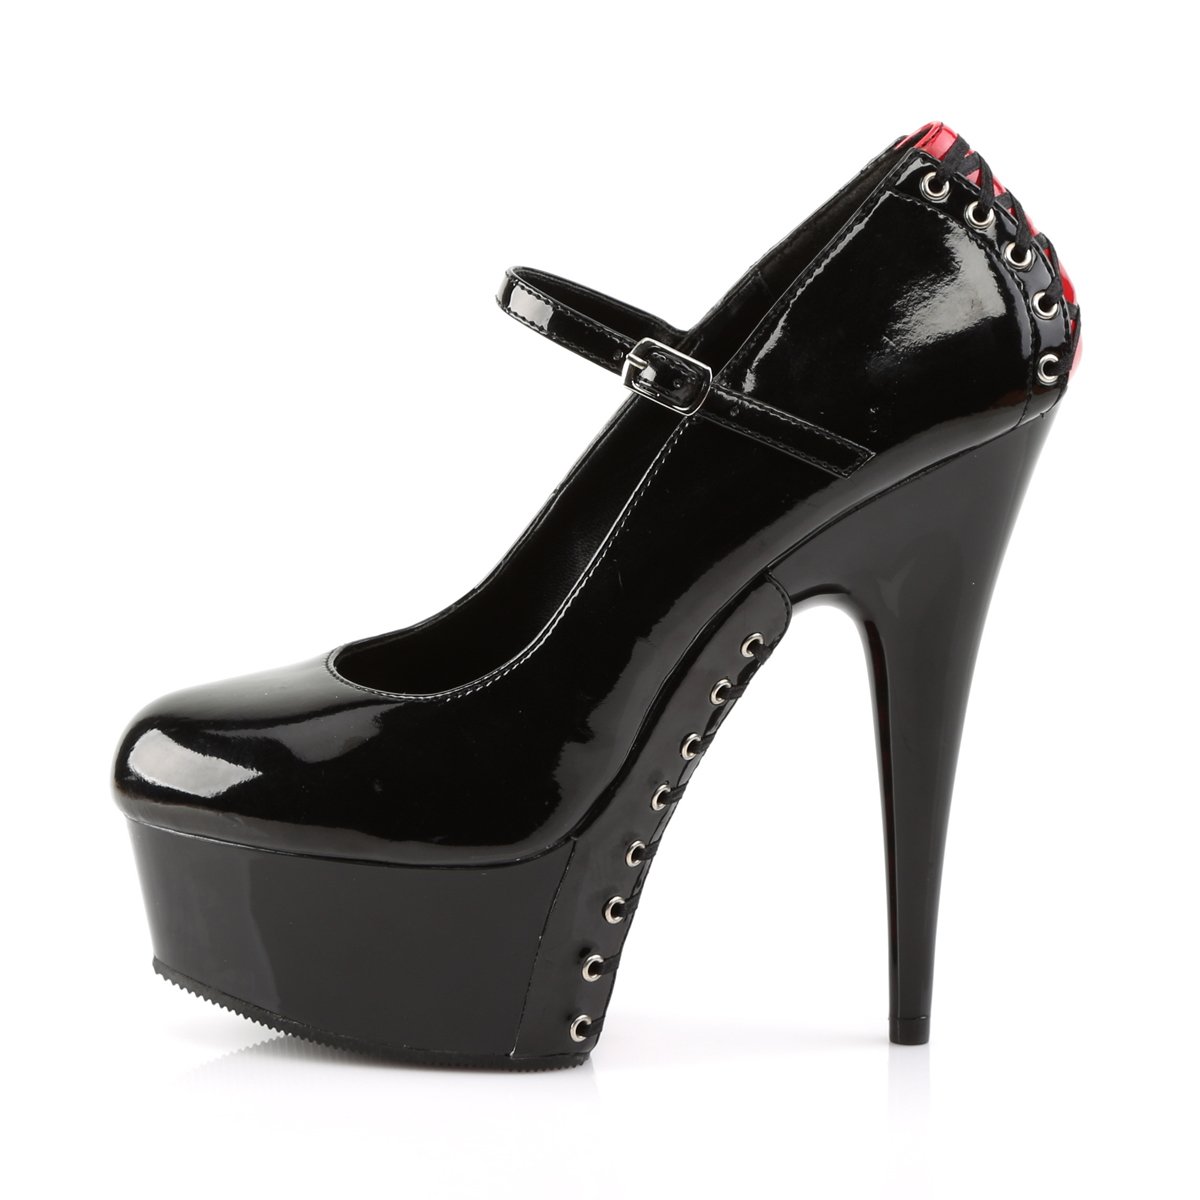 Pleaser Delight-687Fh Platforms | Buy Sexy Shoes at Shoefreaks.ca